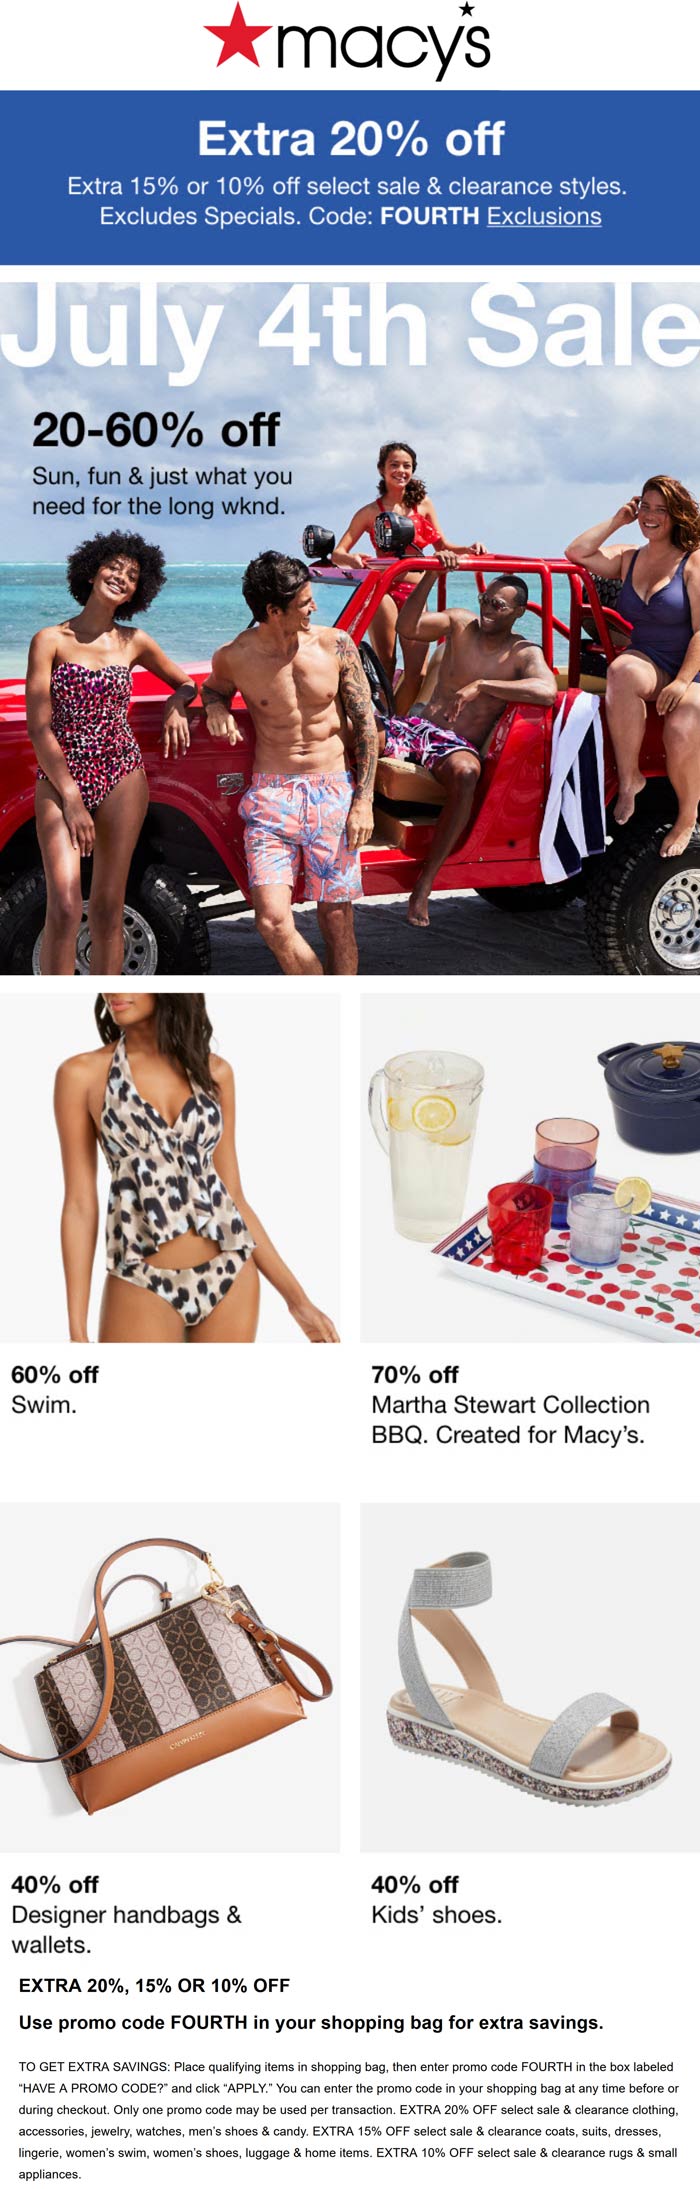 Macys stores Coupon  Extra 10-20% off at Macys, or online via promo code FOURTH #macys 